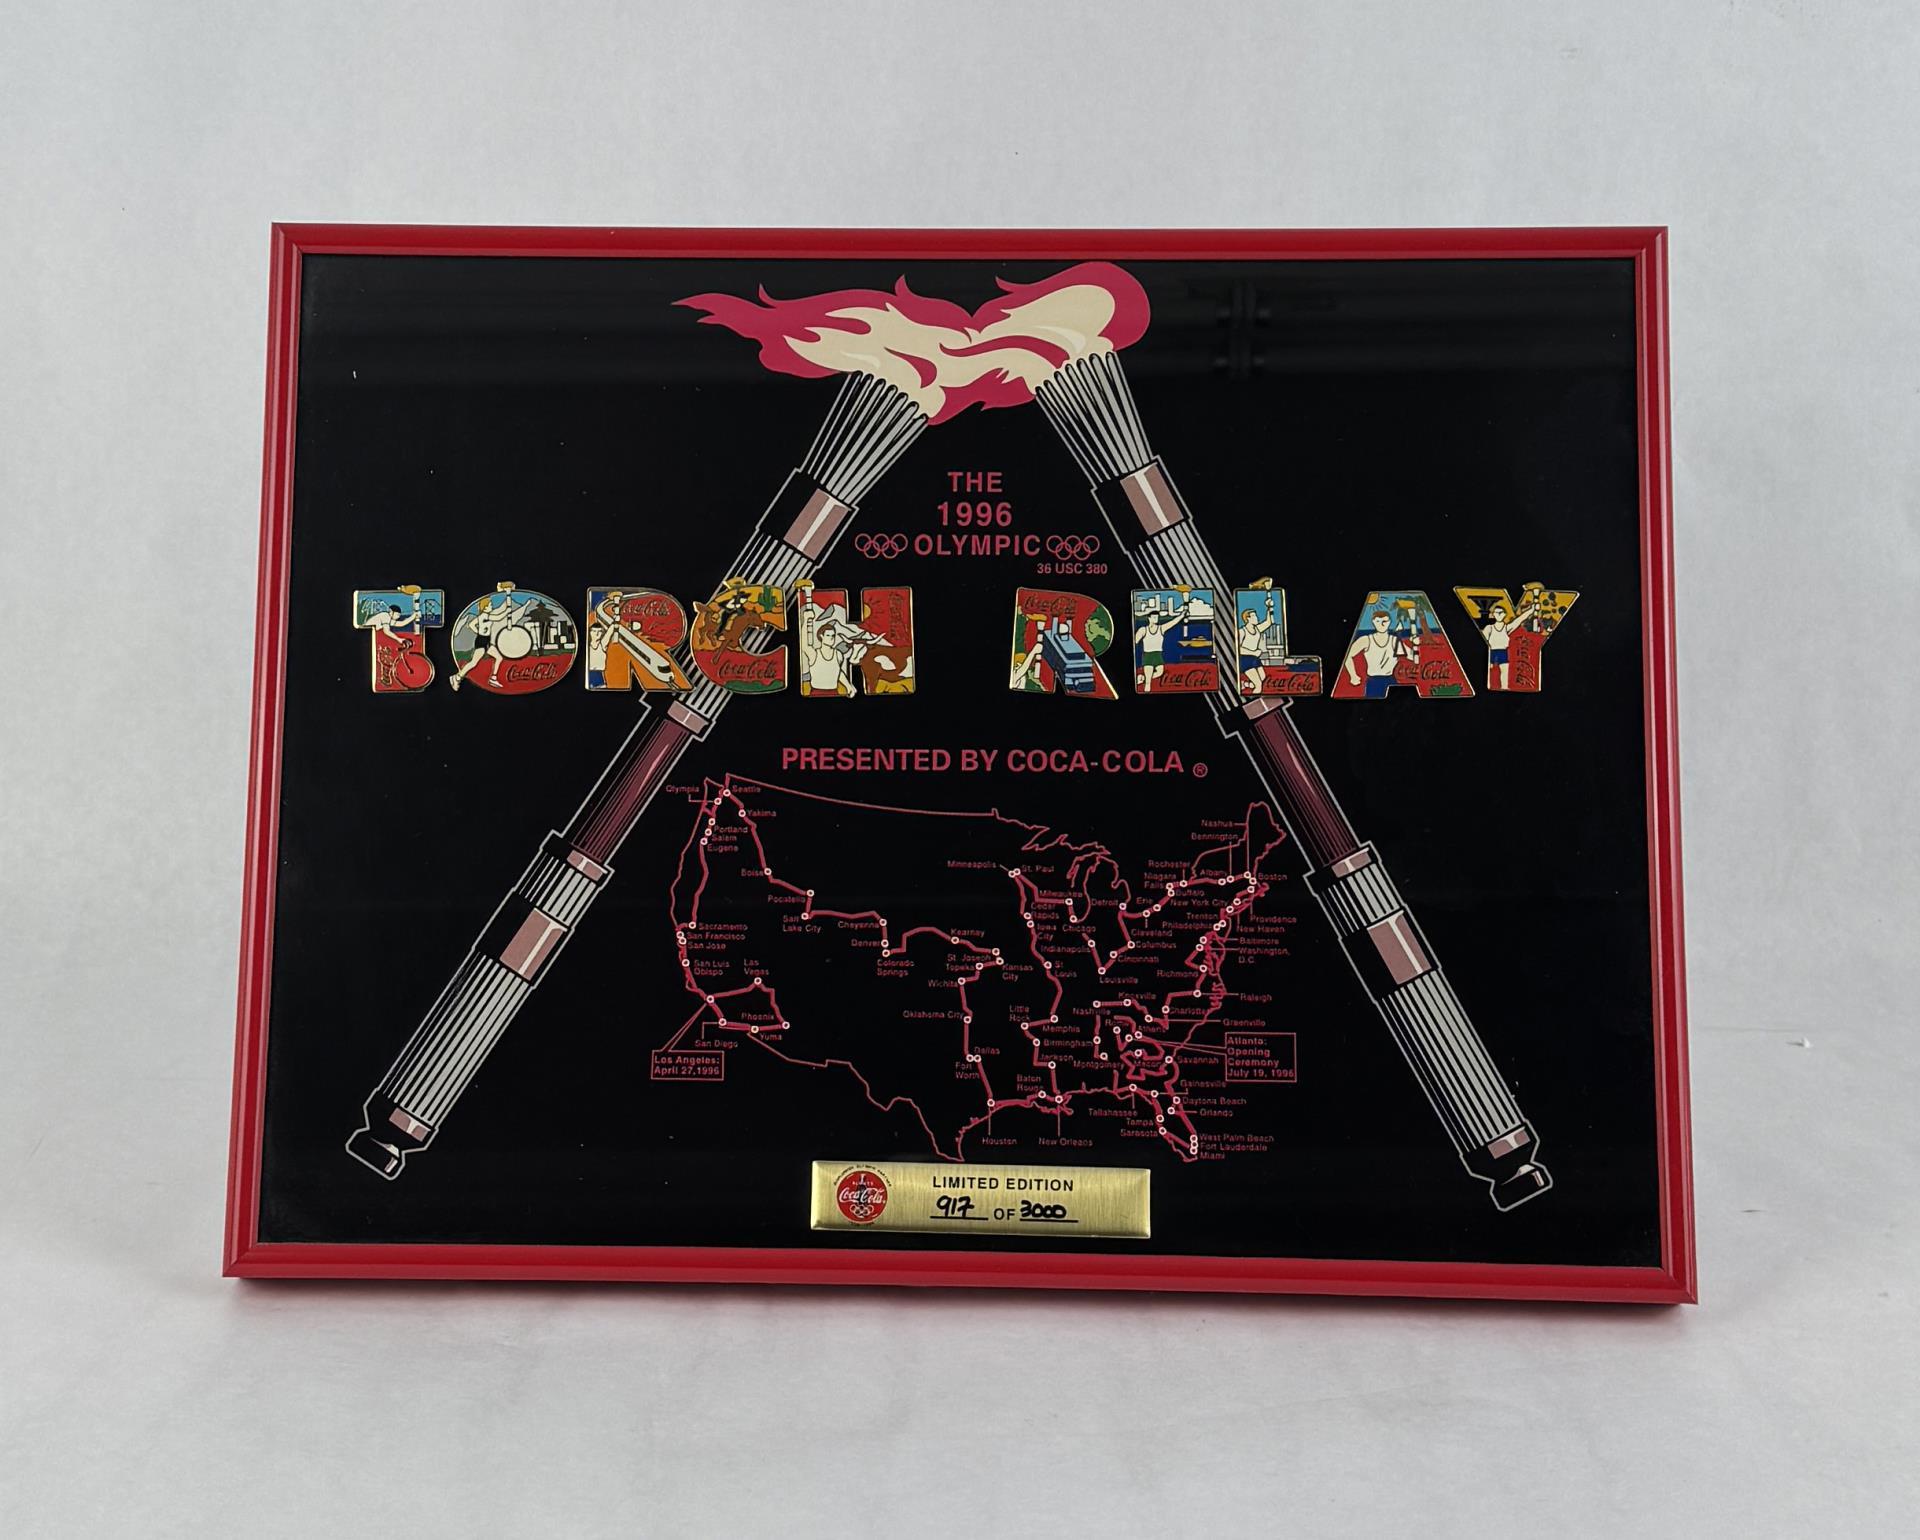 Coca Cola Olympic Torch Relay & Winter Pin Set